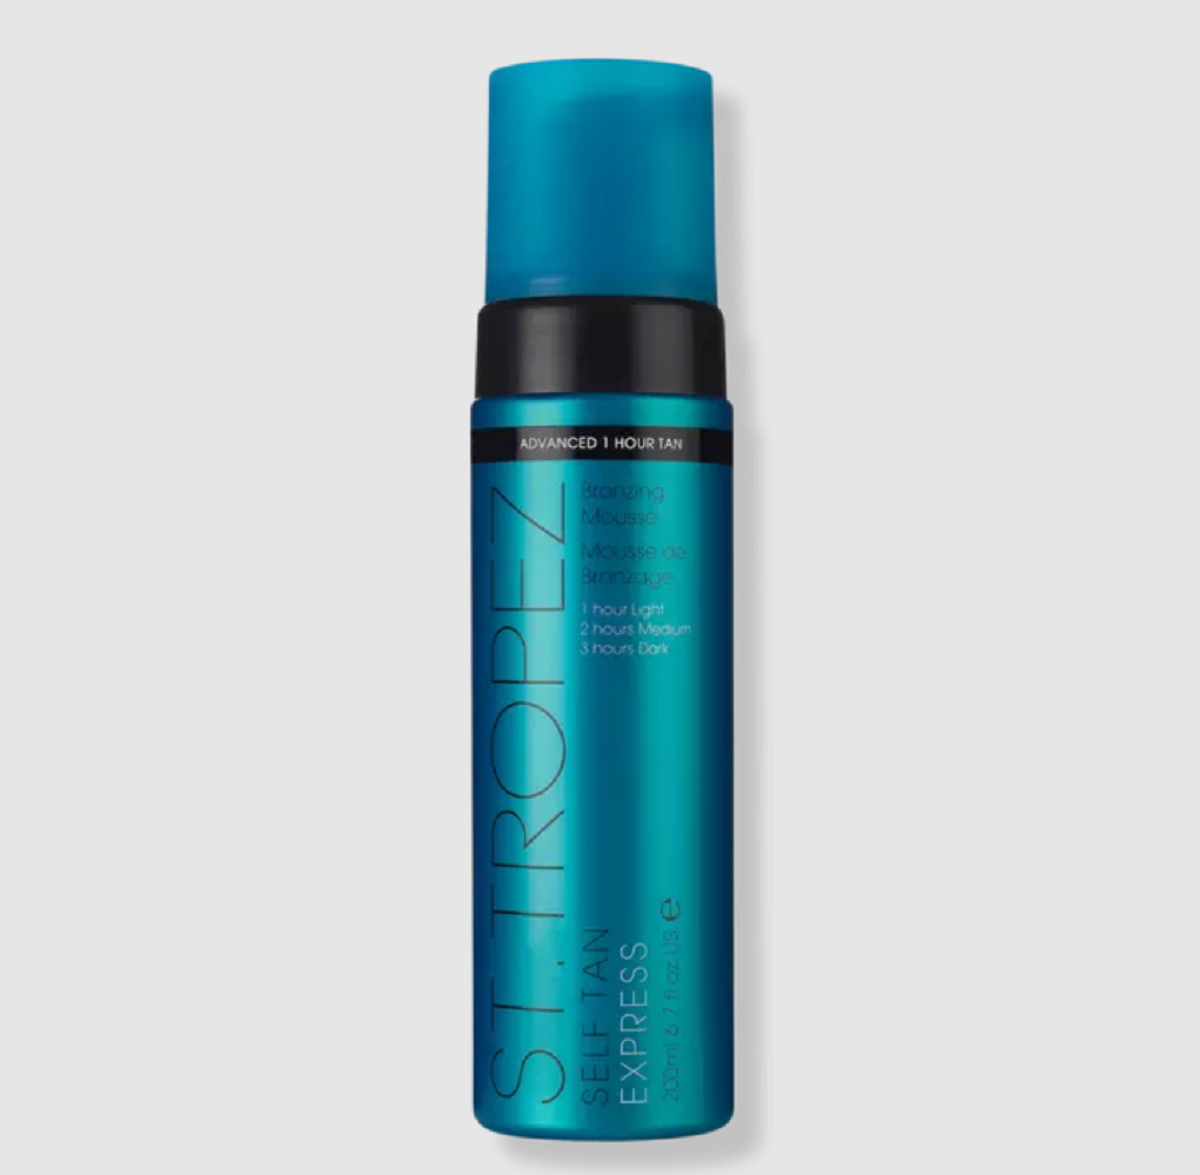 Free Luxe Tan Tonic Drops Deluxe Sample with $25 St. Tropez Order